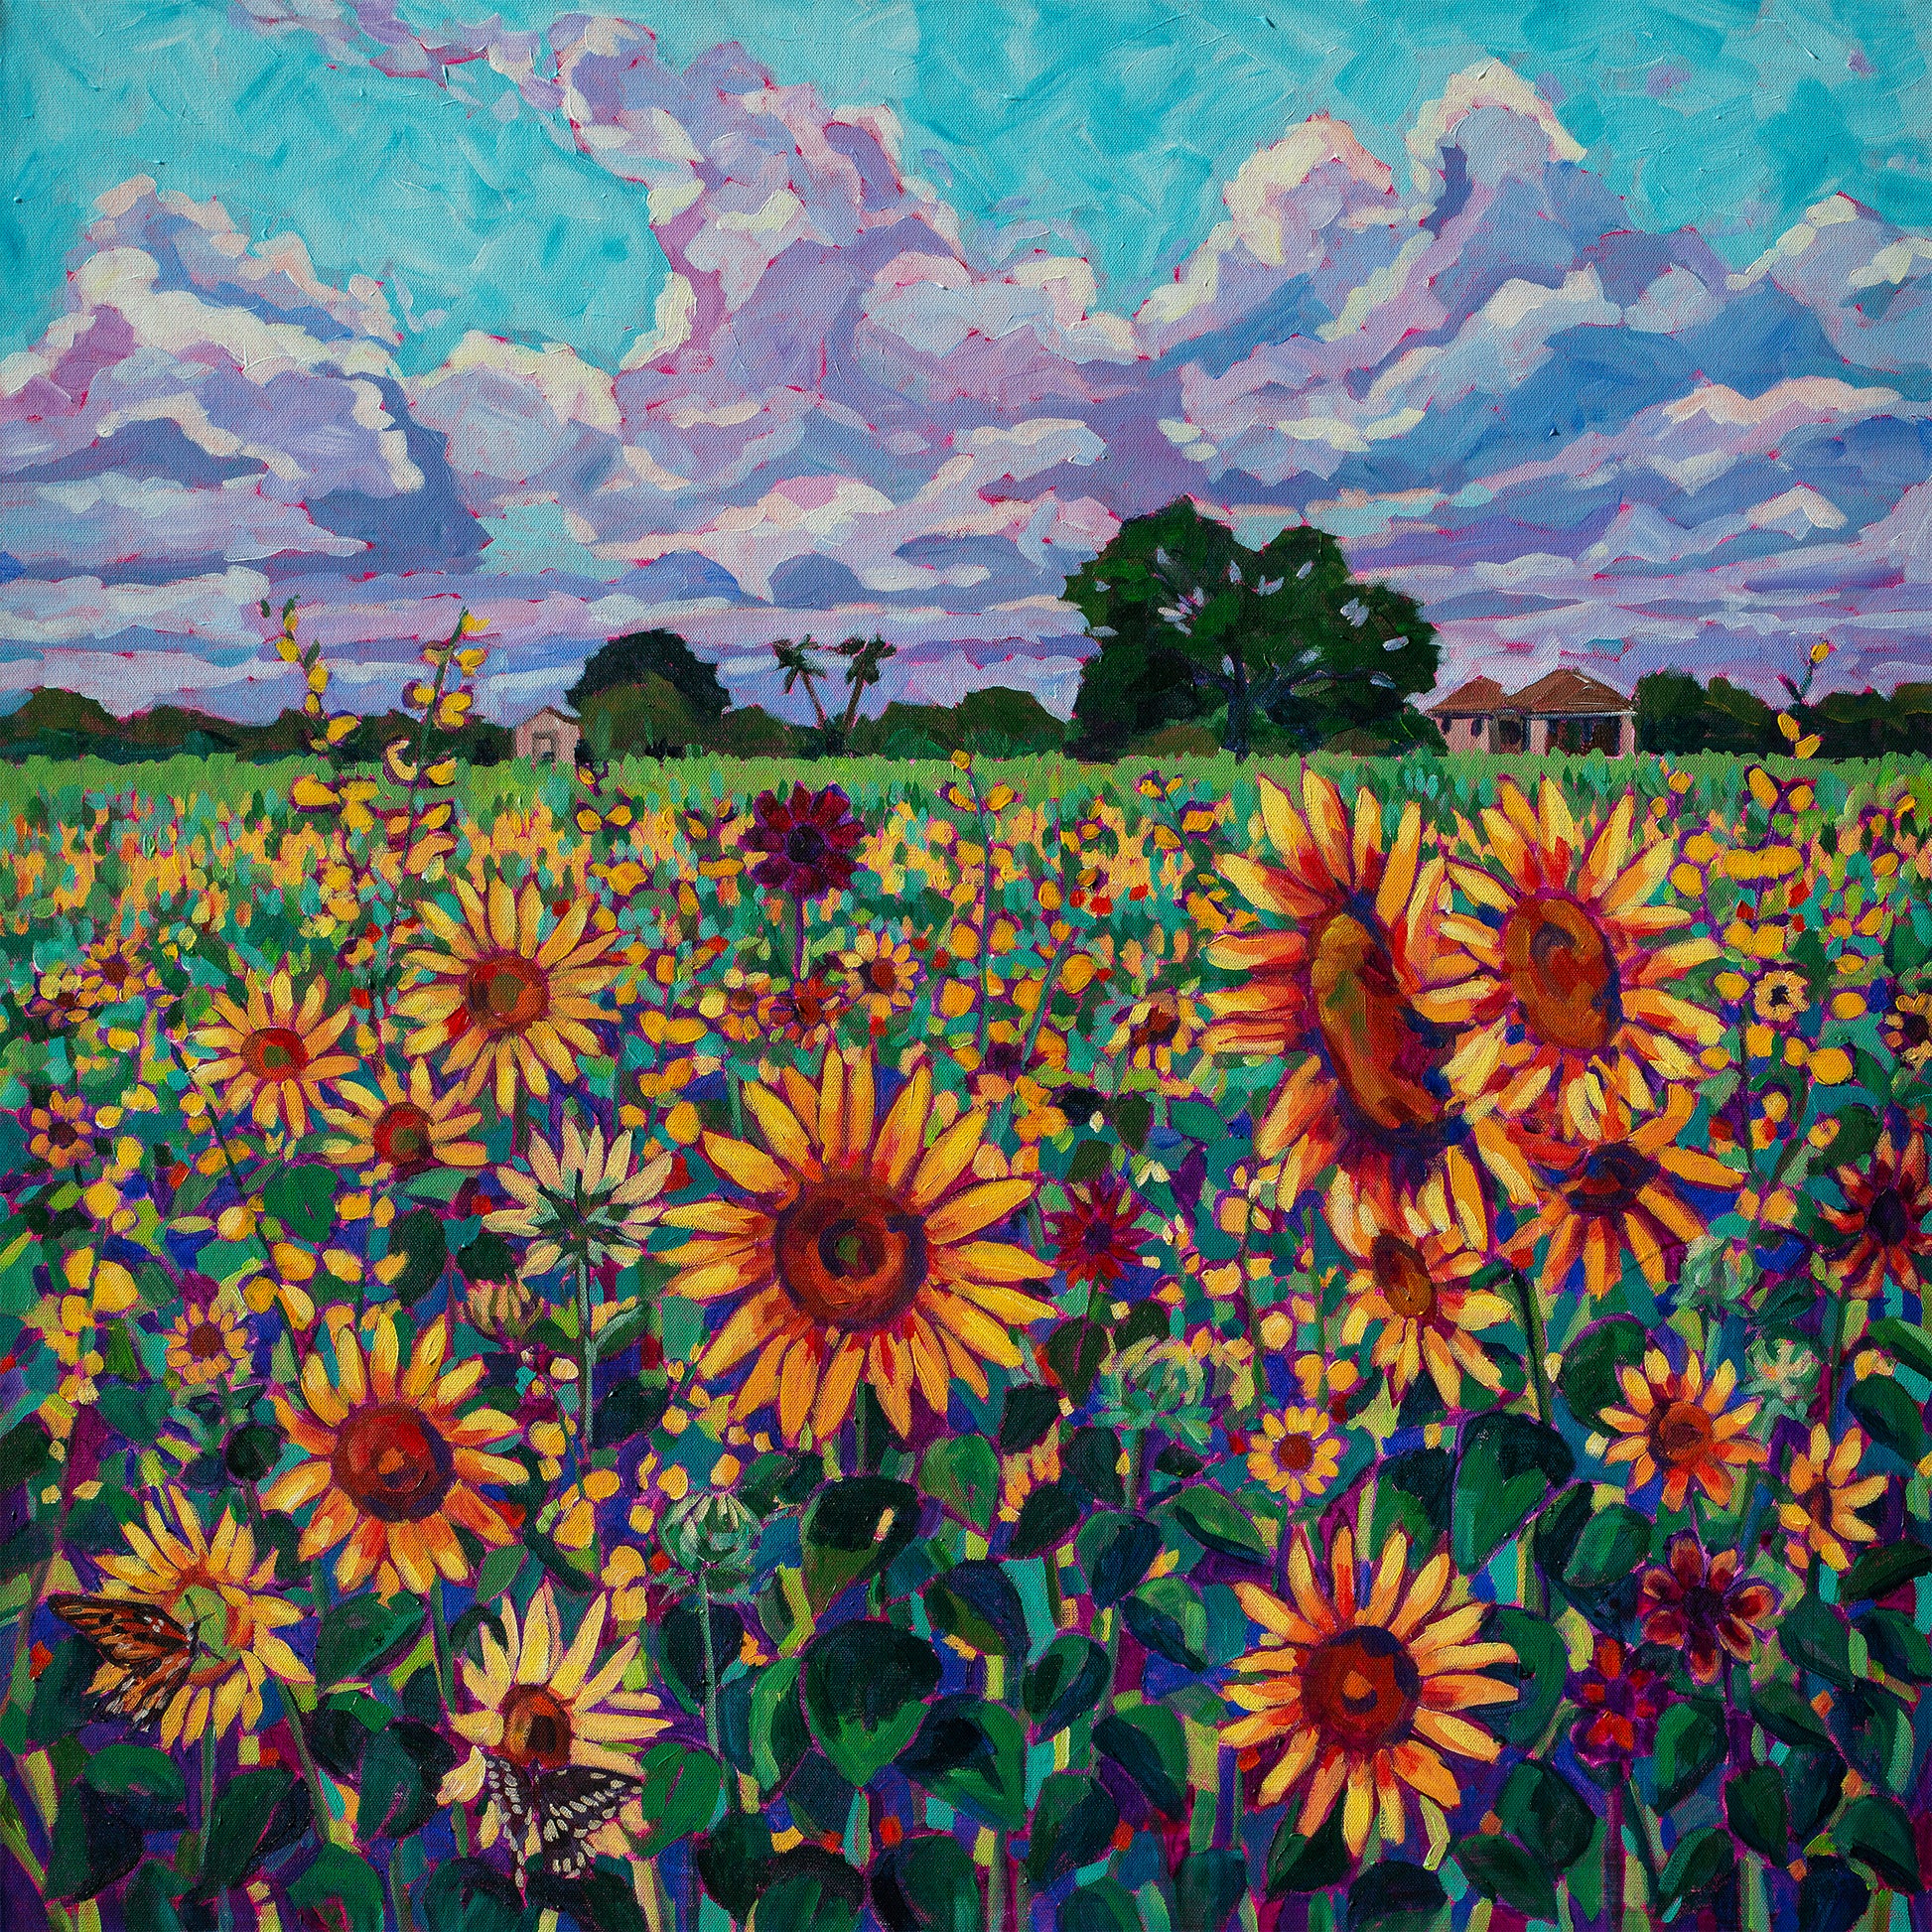 Large field of sunflowers with dramatic skies in a Original vibrant  impressionistic painting 